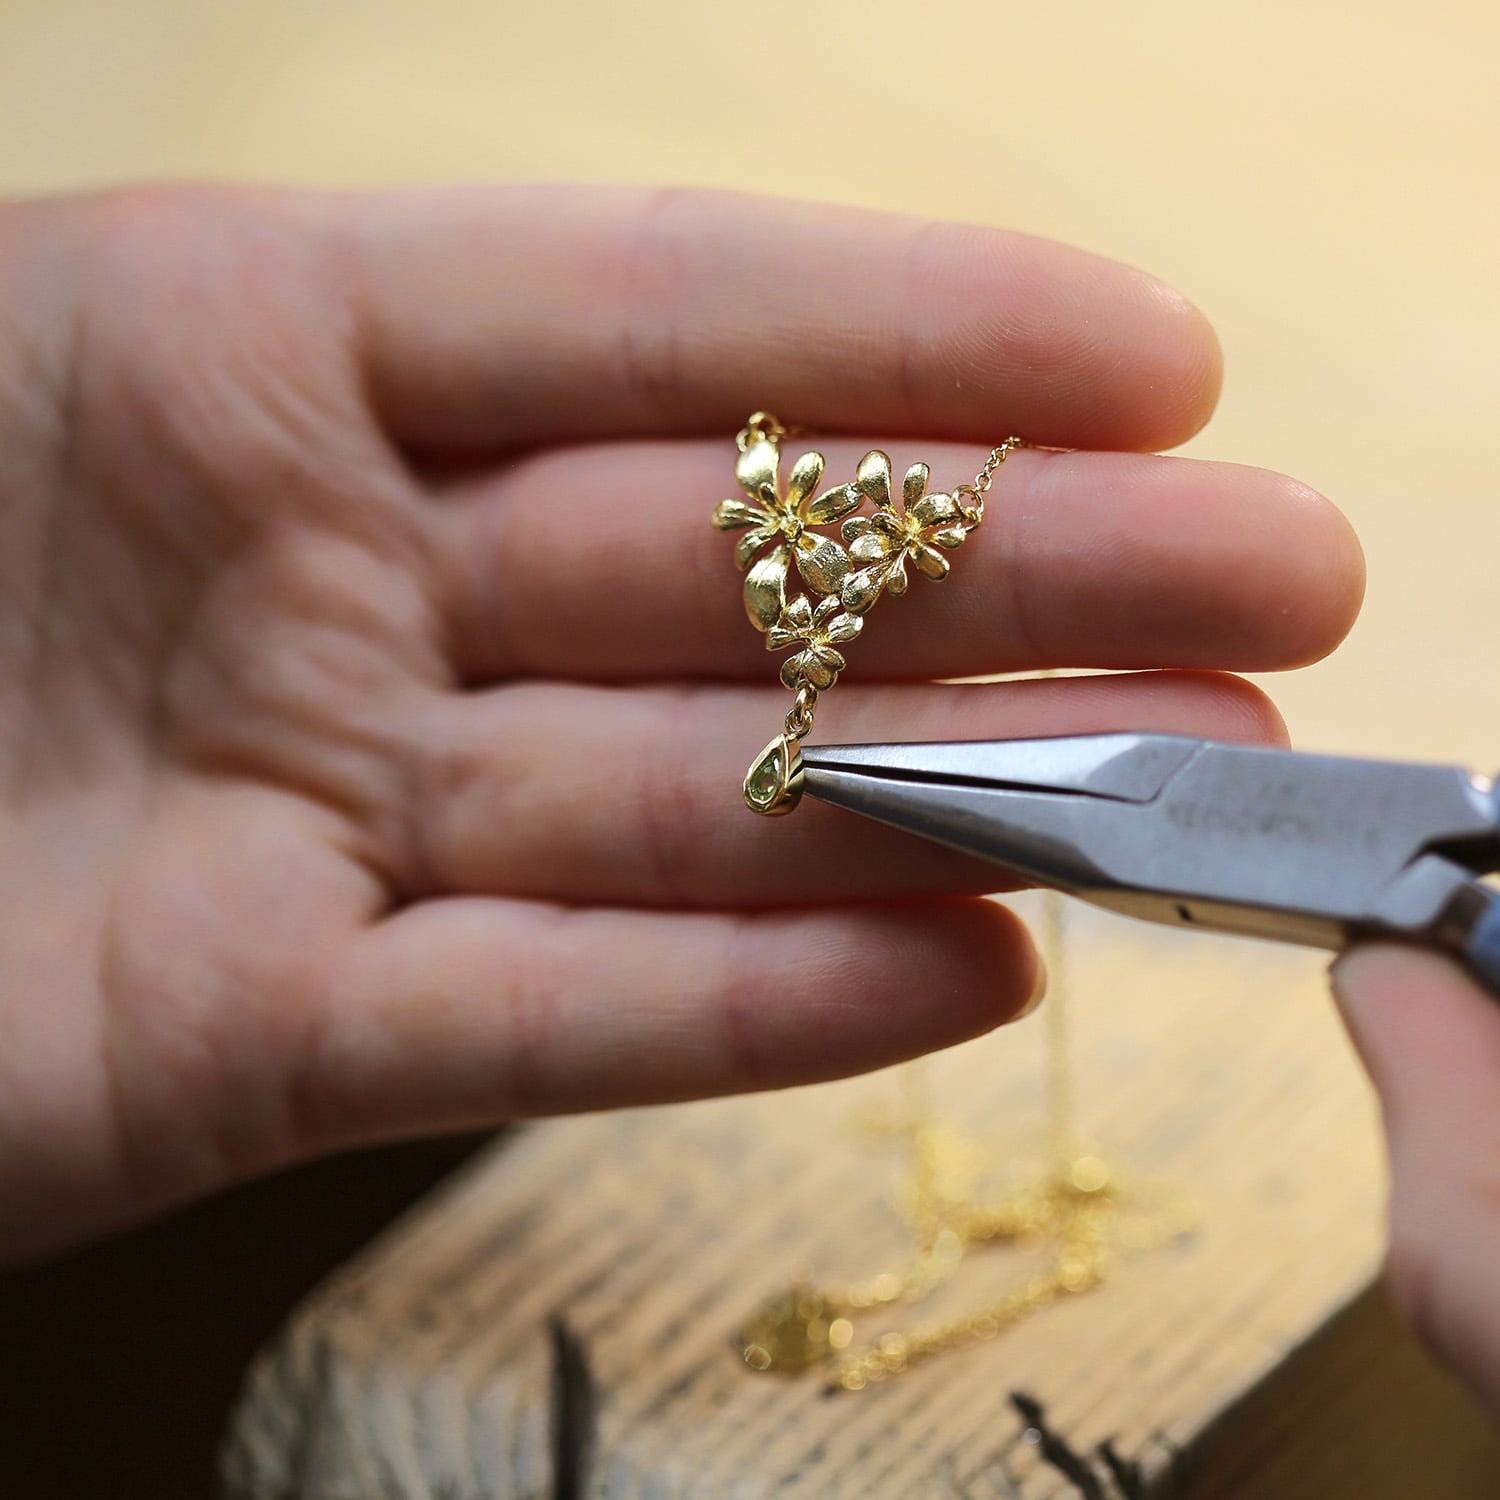 Gold Plated Leafy Rosette Necklace with Green Peridot Teardrop Charm necklace being worked on in Alex Monroe's workshop